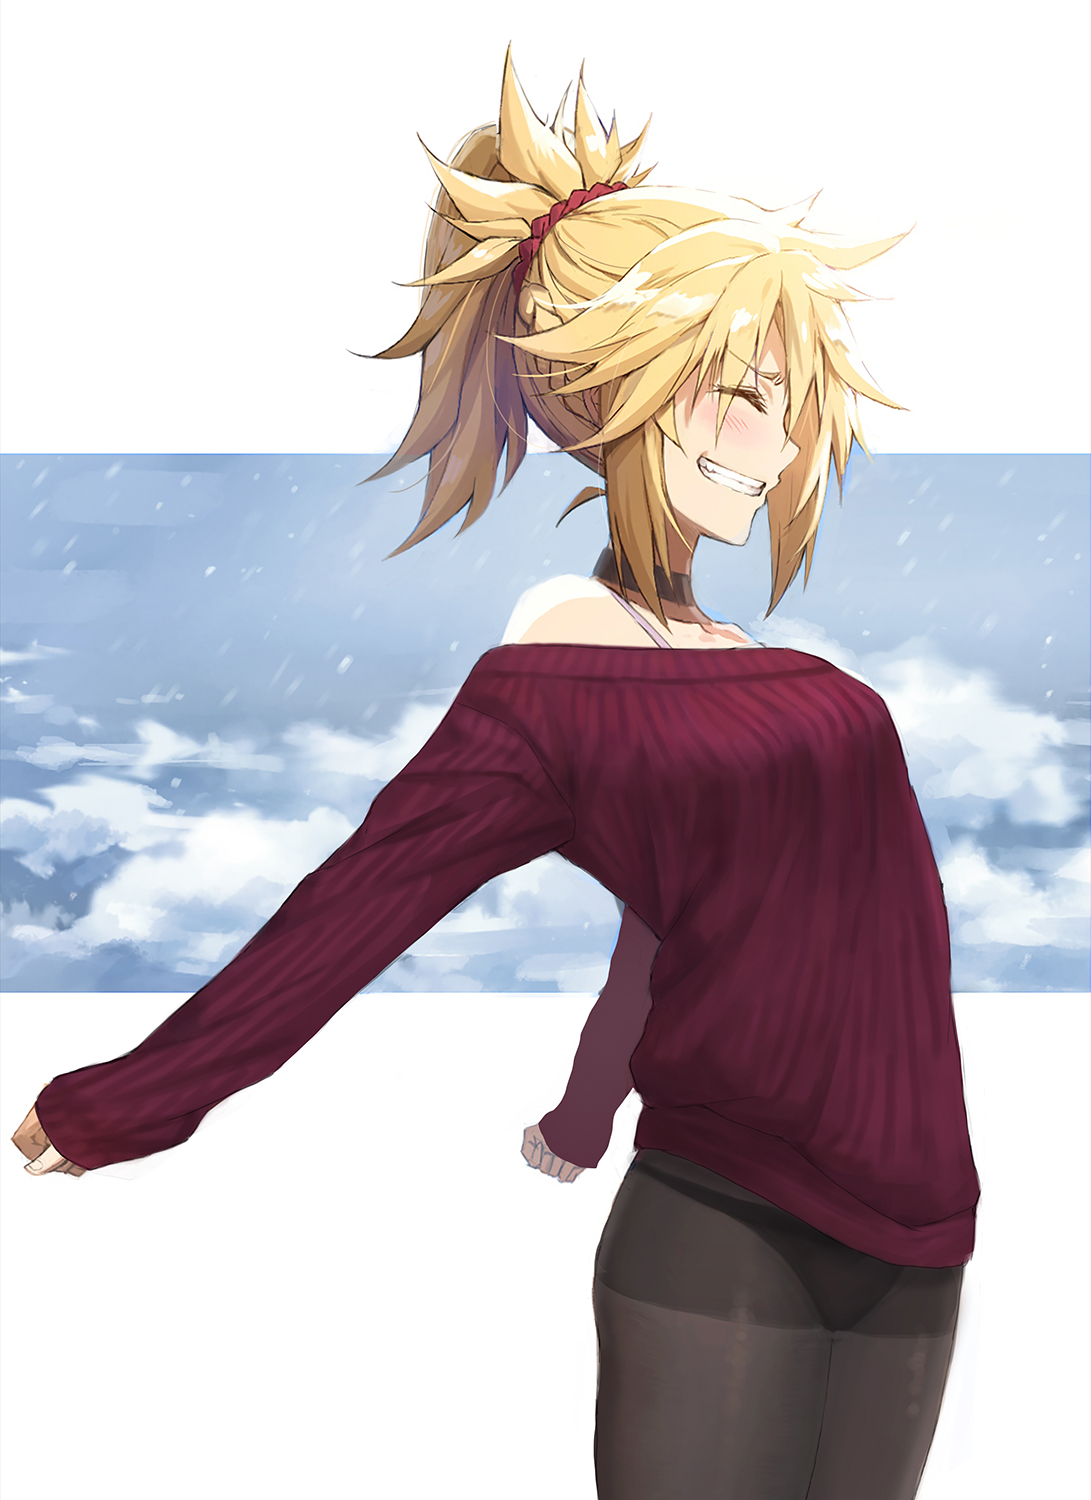 Anime 1091x1500 anime anime girls Fate series Fate/Apocrypha  Fate/Grand Order Mordred (Fate/Apocrypha) ponytail long hair blonde artwork digital art fan art